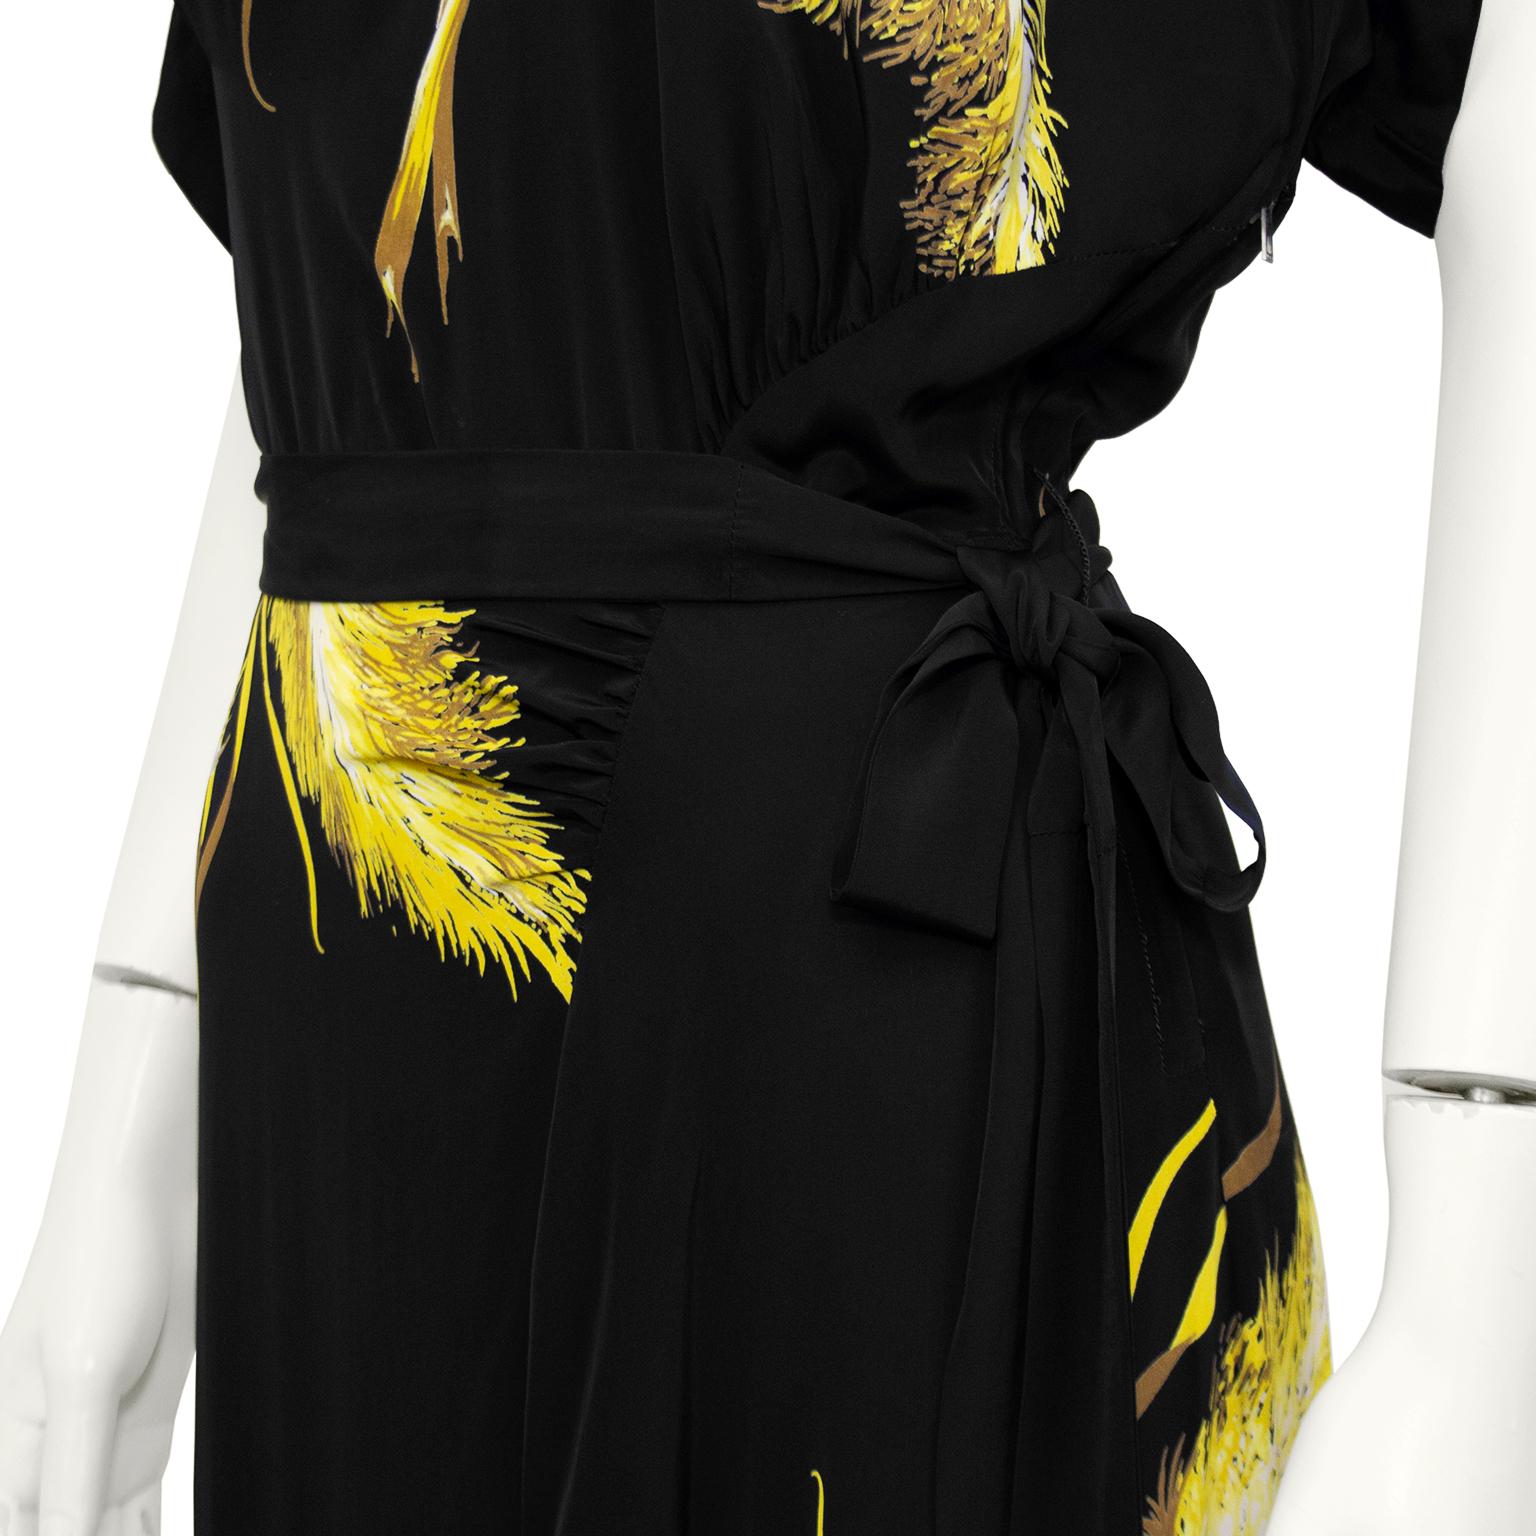 1940s Gilbert Adrian Inspired Black Silk Long Dress with Wheat Sheaf Print   In Good Condition For Sale In Toronto, Ontario